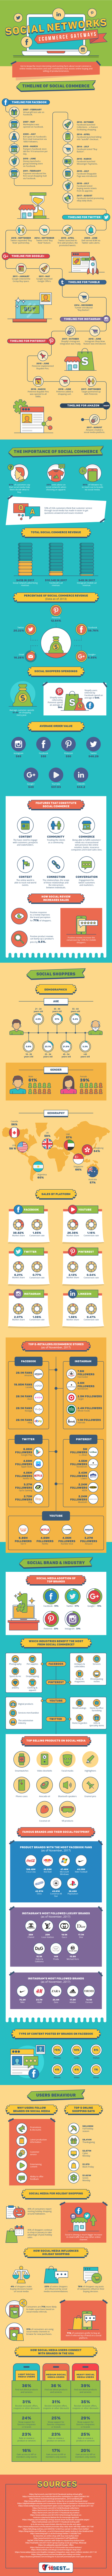 Social Media and E-Commerce Interesting Facts